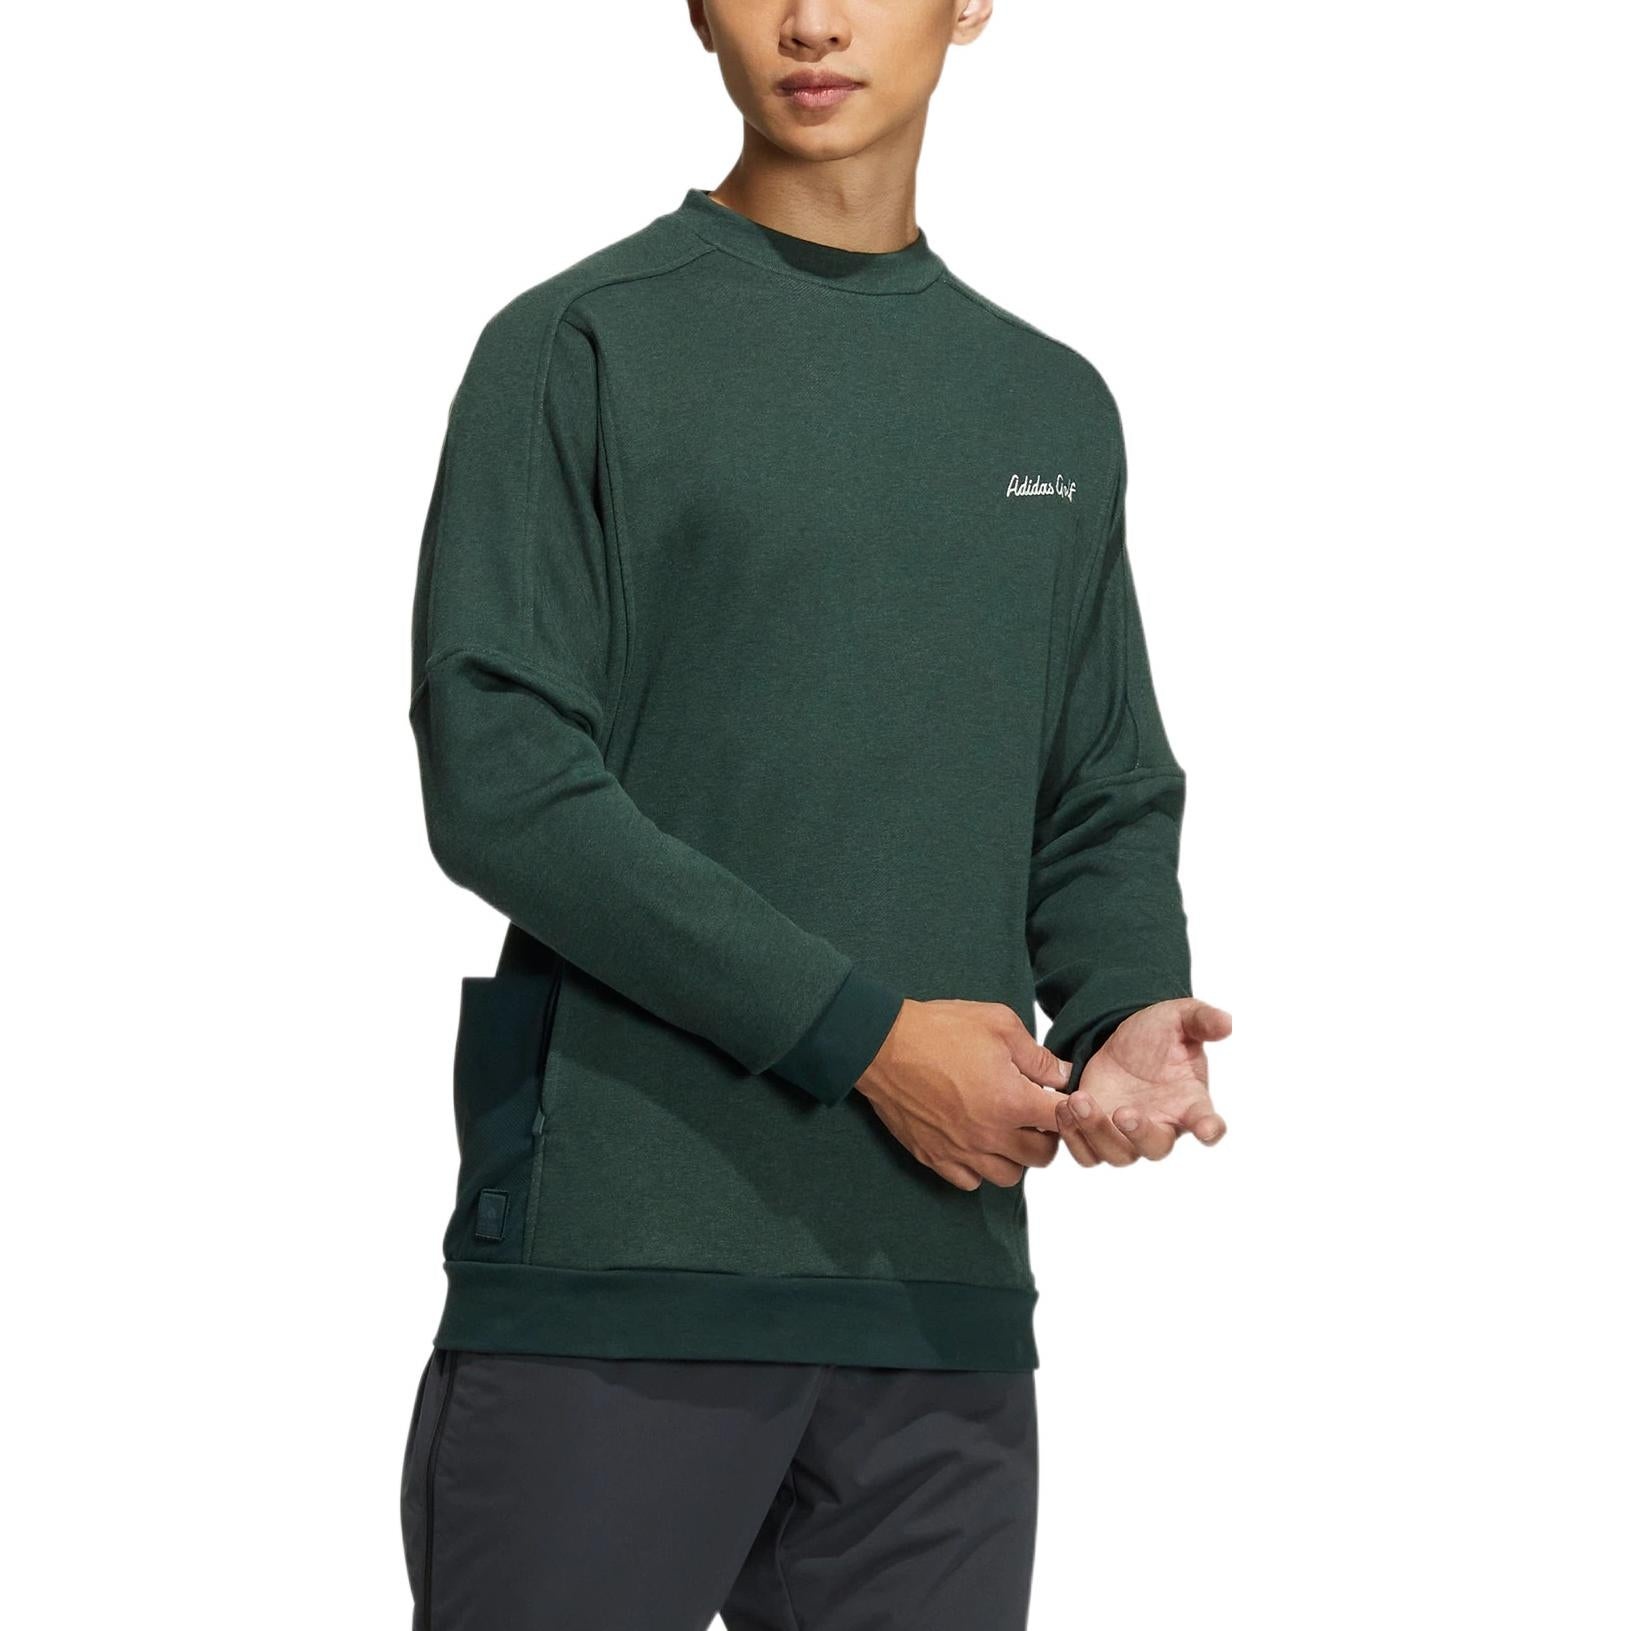 Men's adidas Gt Crew Sw Solid Color Alphabet Embroidered Round Neck Pullover Long Sleeves Green HG32 - 4